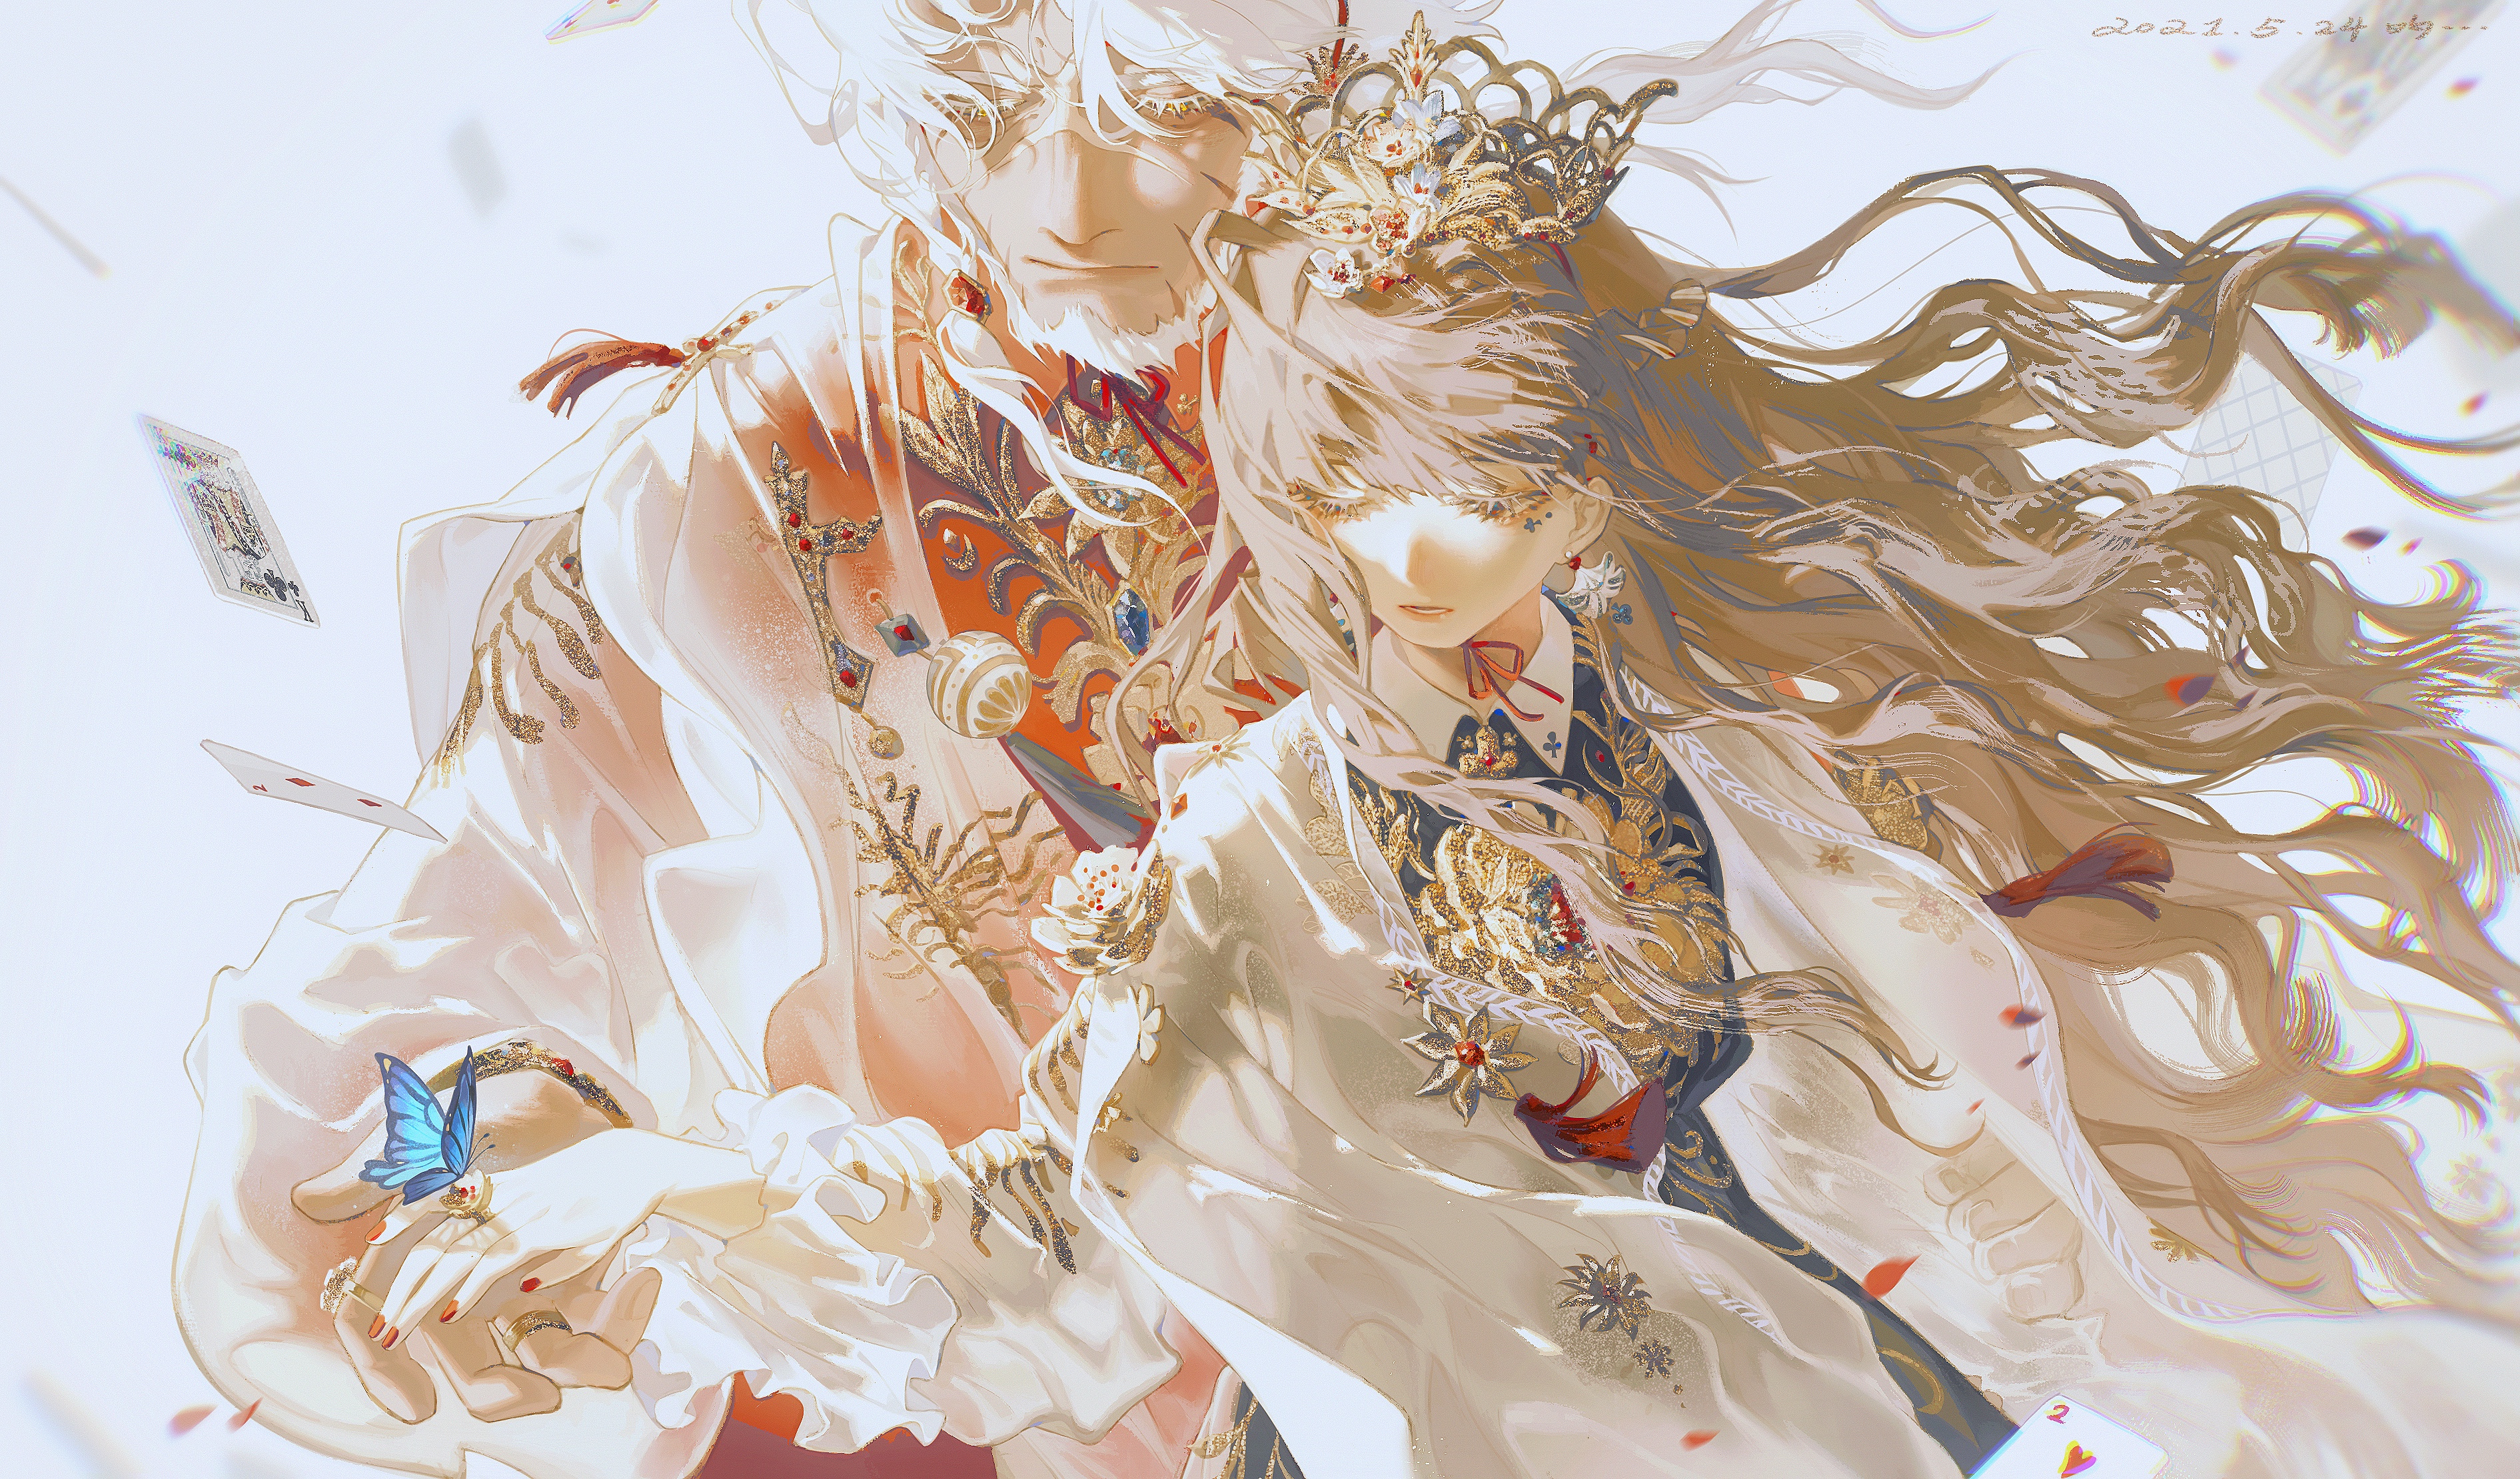 Anime 3782x2220 anime anime girls Pixiv Forever 7th Capital hair blowing in the wind wind crown insect bright background dress butterfly closed mouth beard parted lips long hair cards rings red nails anime men